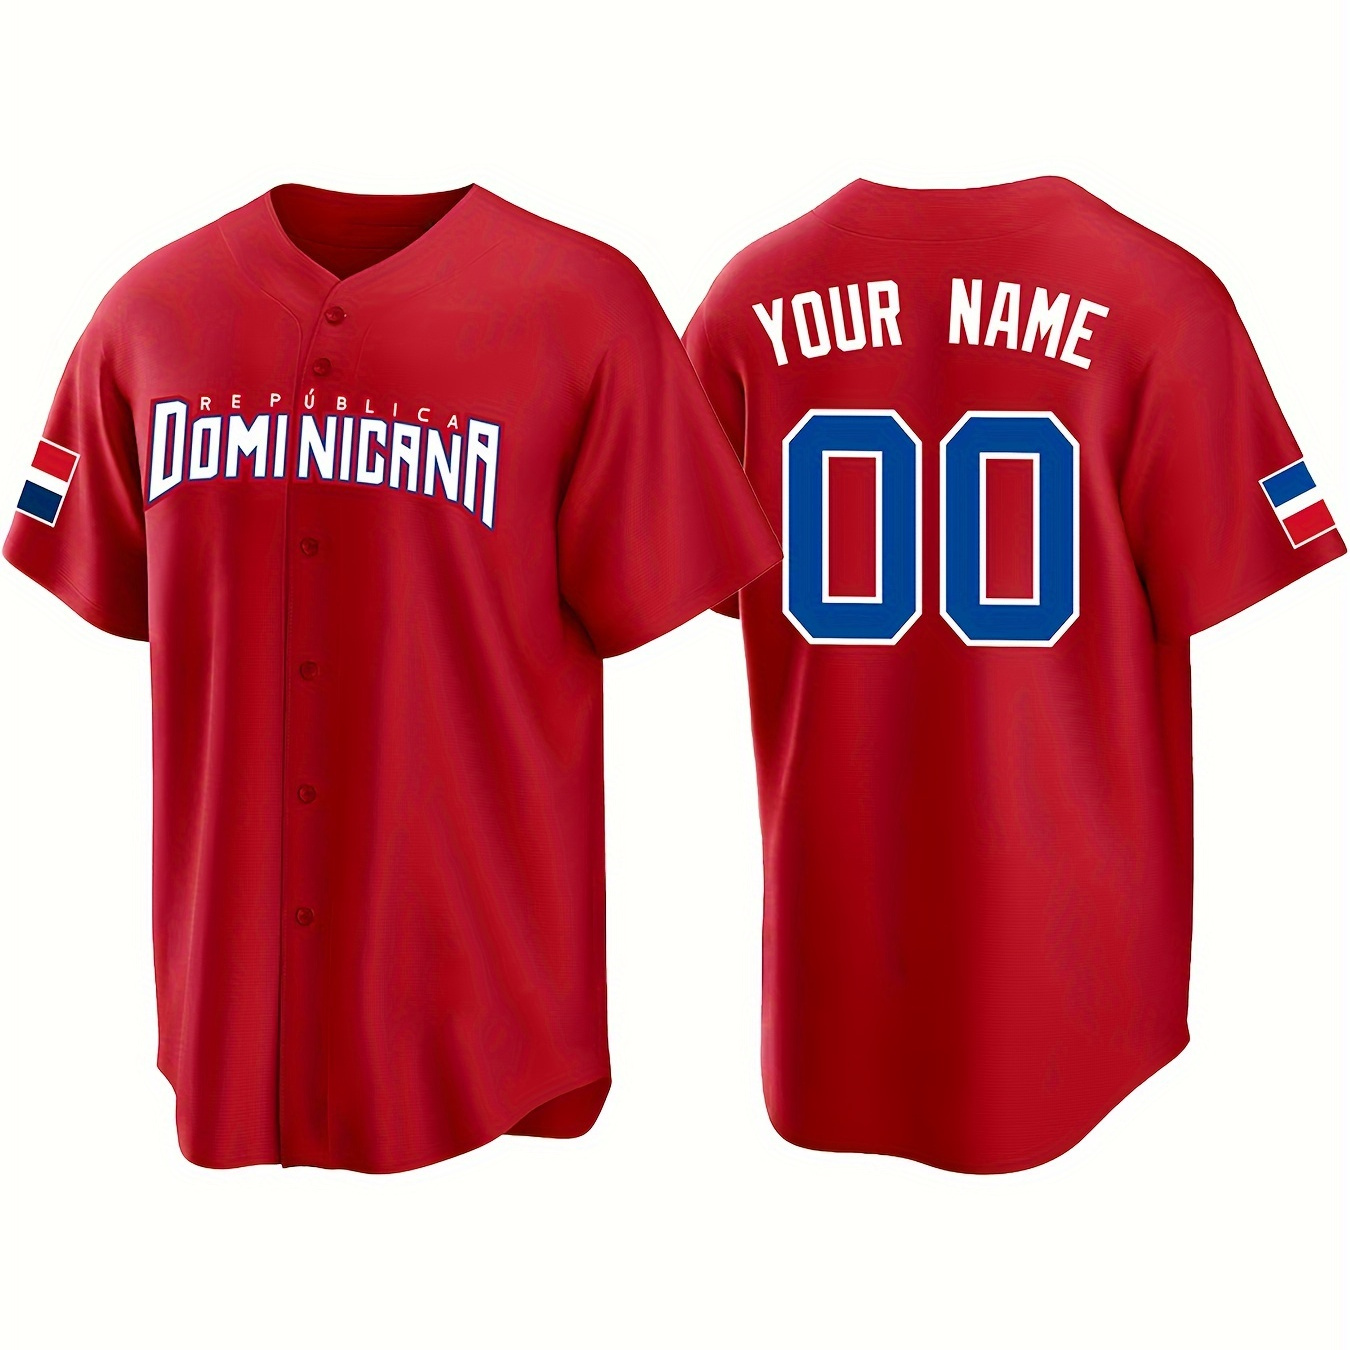 

Customizable Name And Number Men's Baseball Jersey Embroidered Outdoor Daily Leisure Sports Customization S-3xl